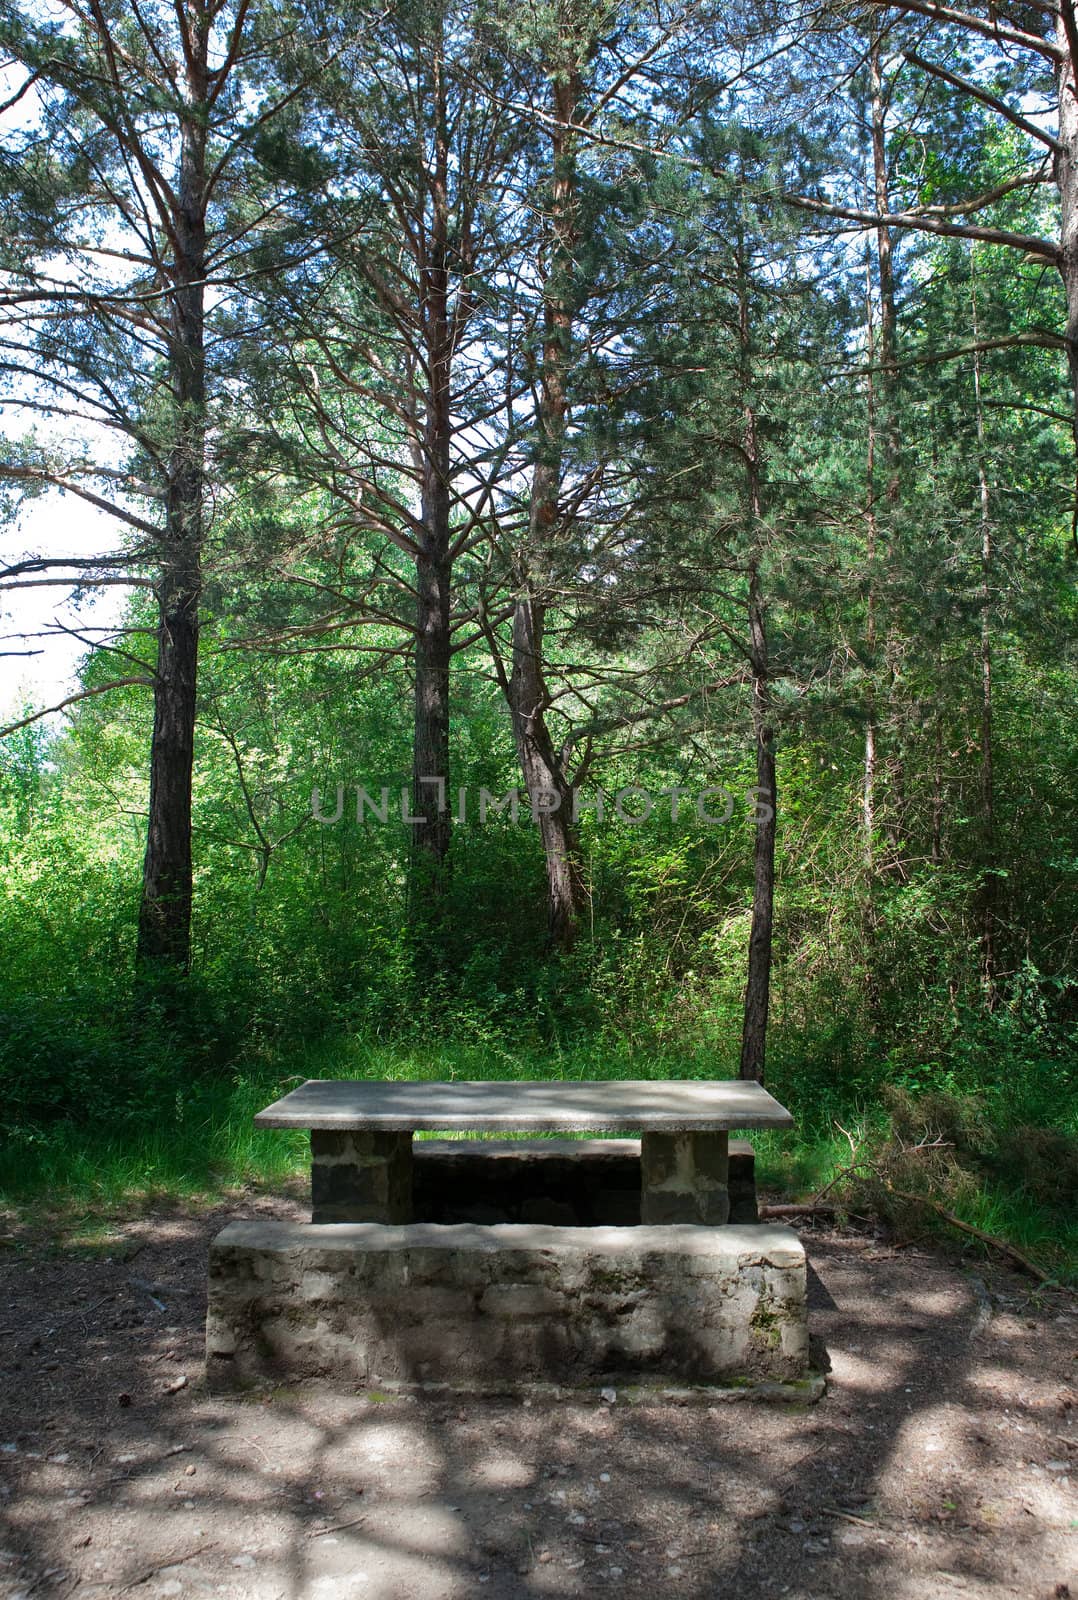 Picnic table among the trees of the forest